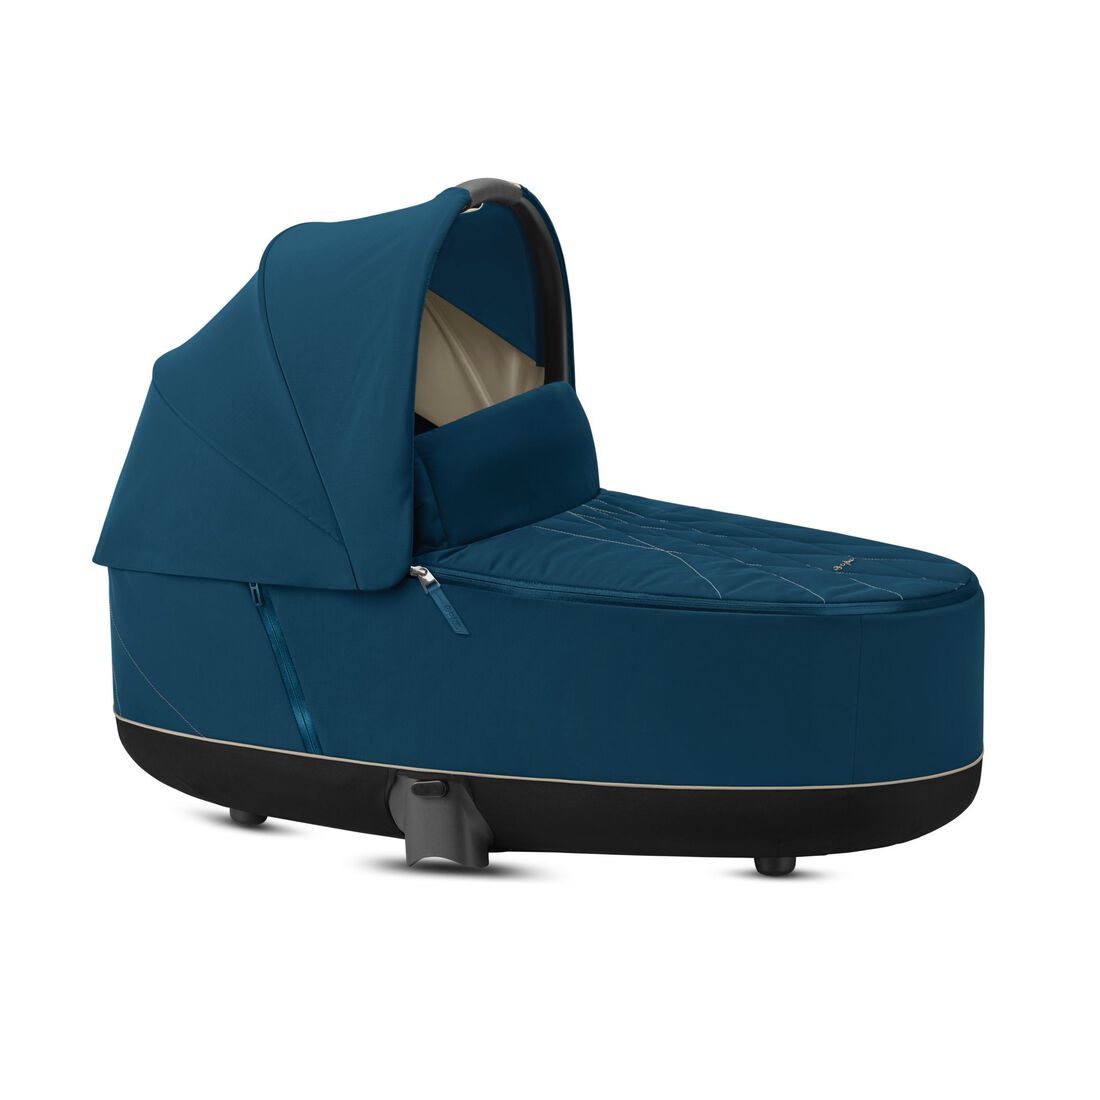 CYBEX Priam 3 Lux Carry Cot - Mountain Blue in Mountain Blue large image number 1